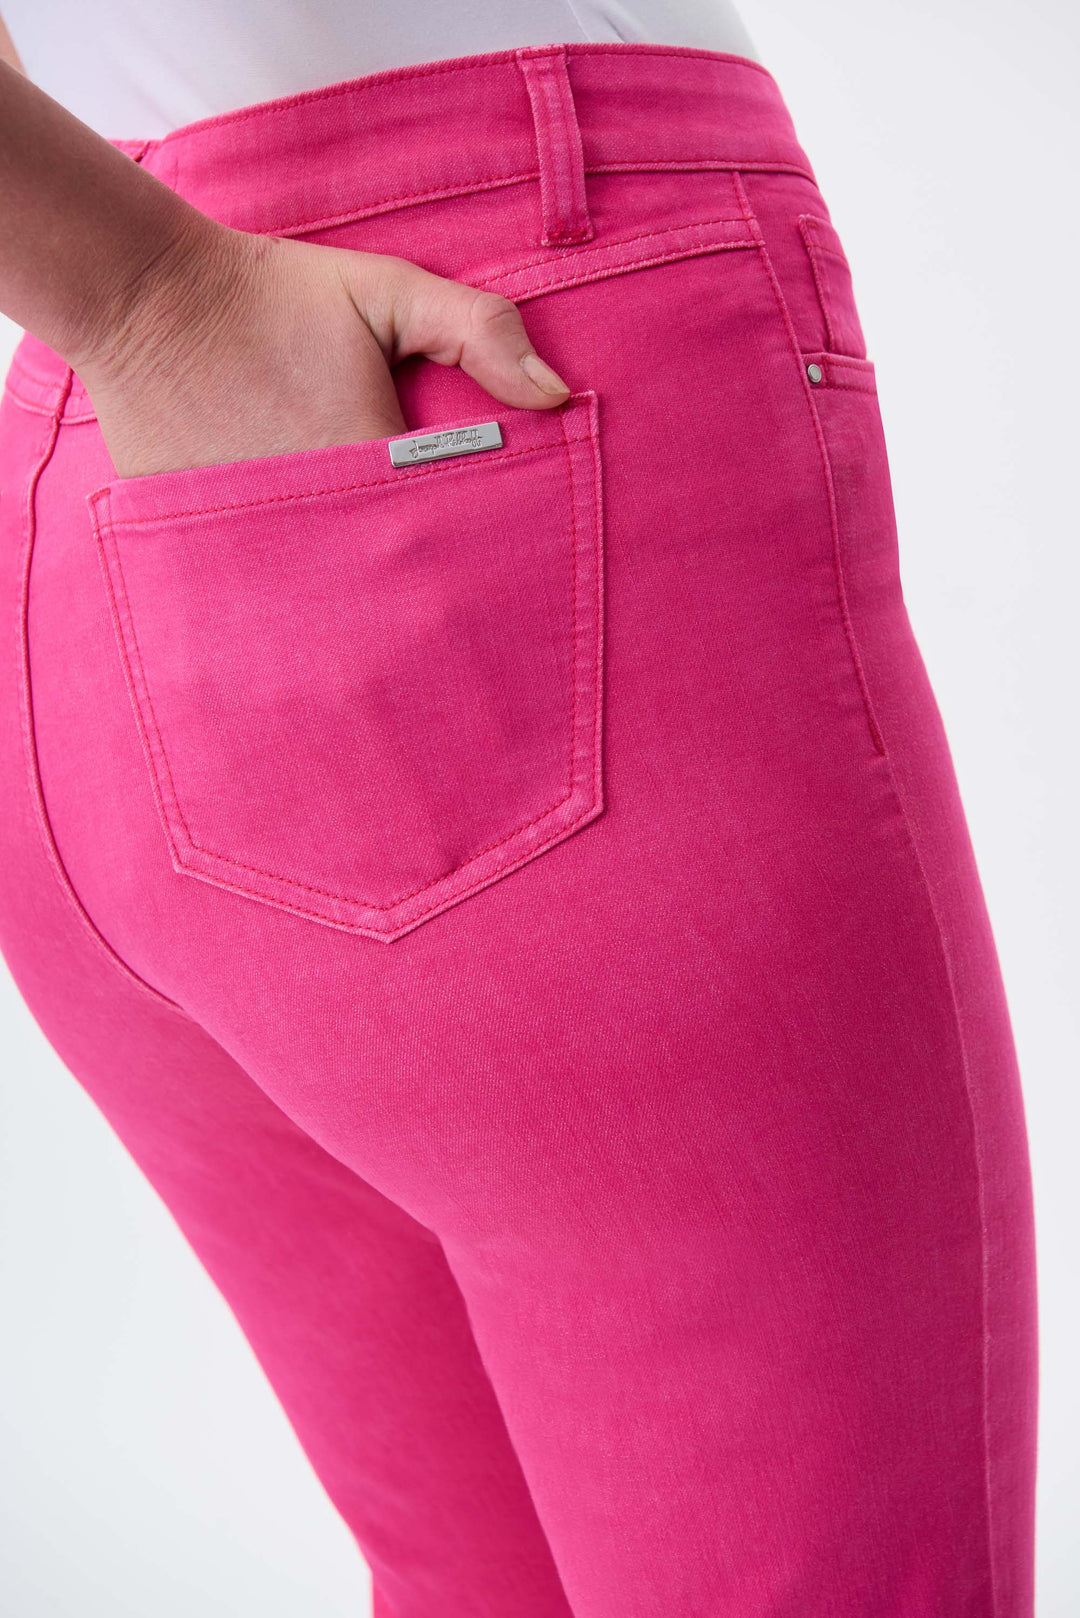 JOSEPH RIBKOFF SPRING 2023 women's casual colourful slim cropped jeans with frayed hem - pink detail